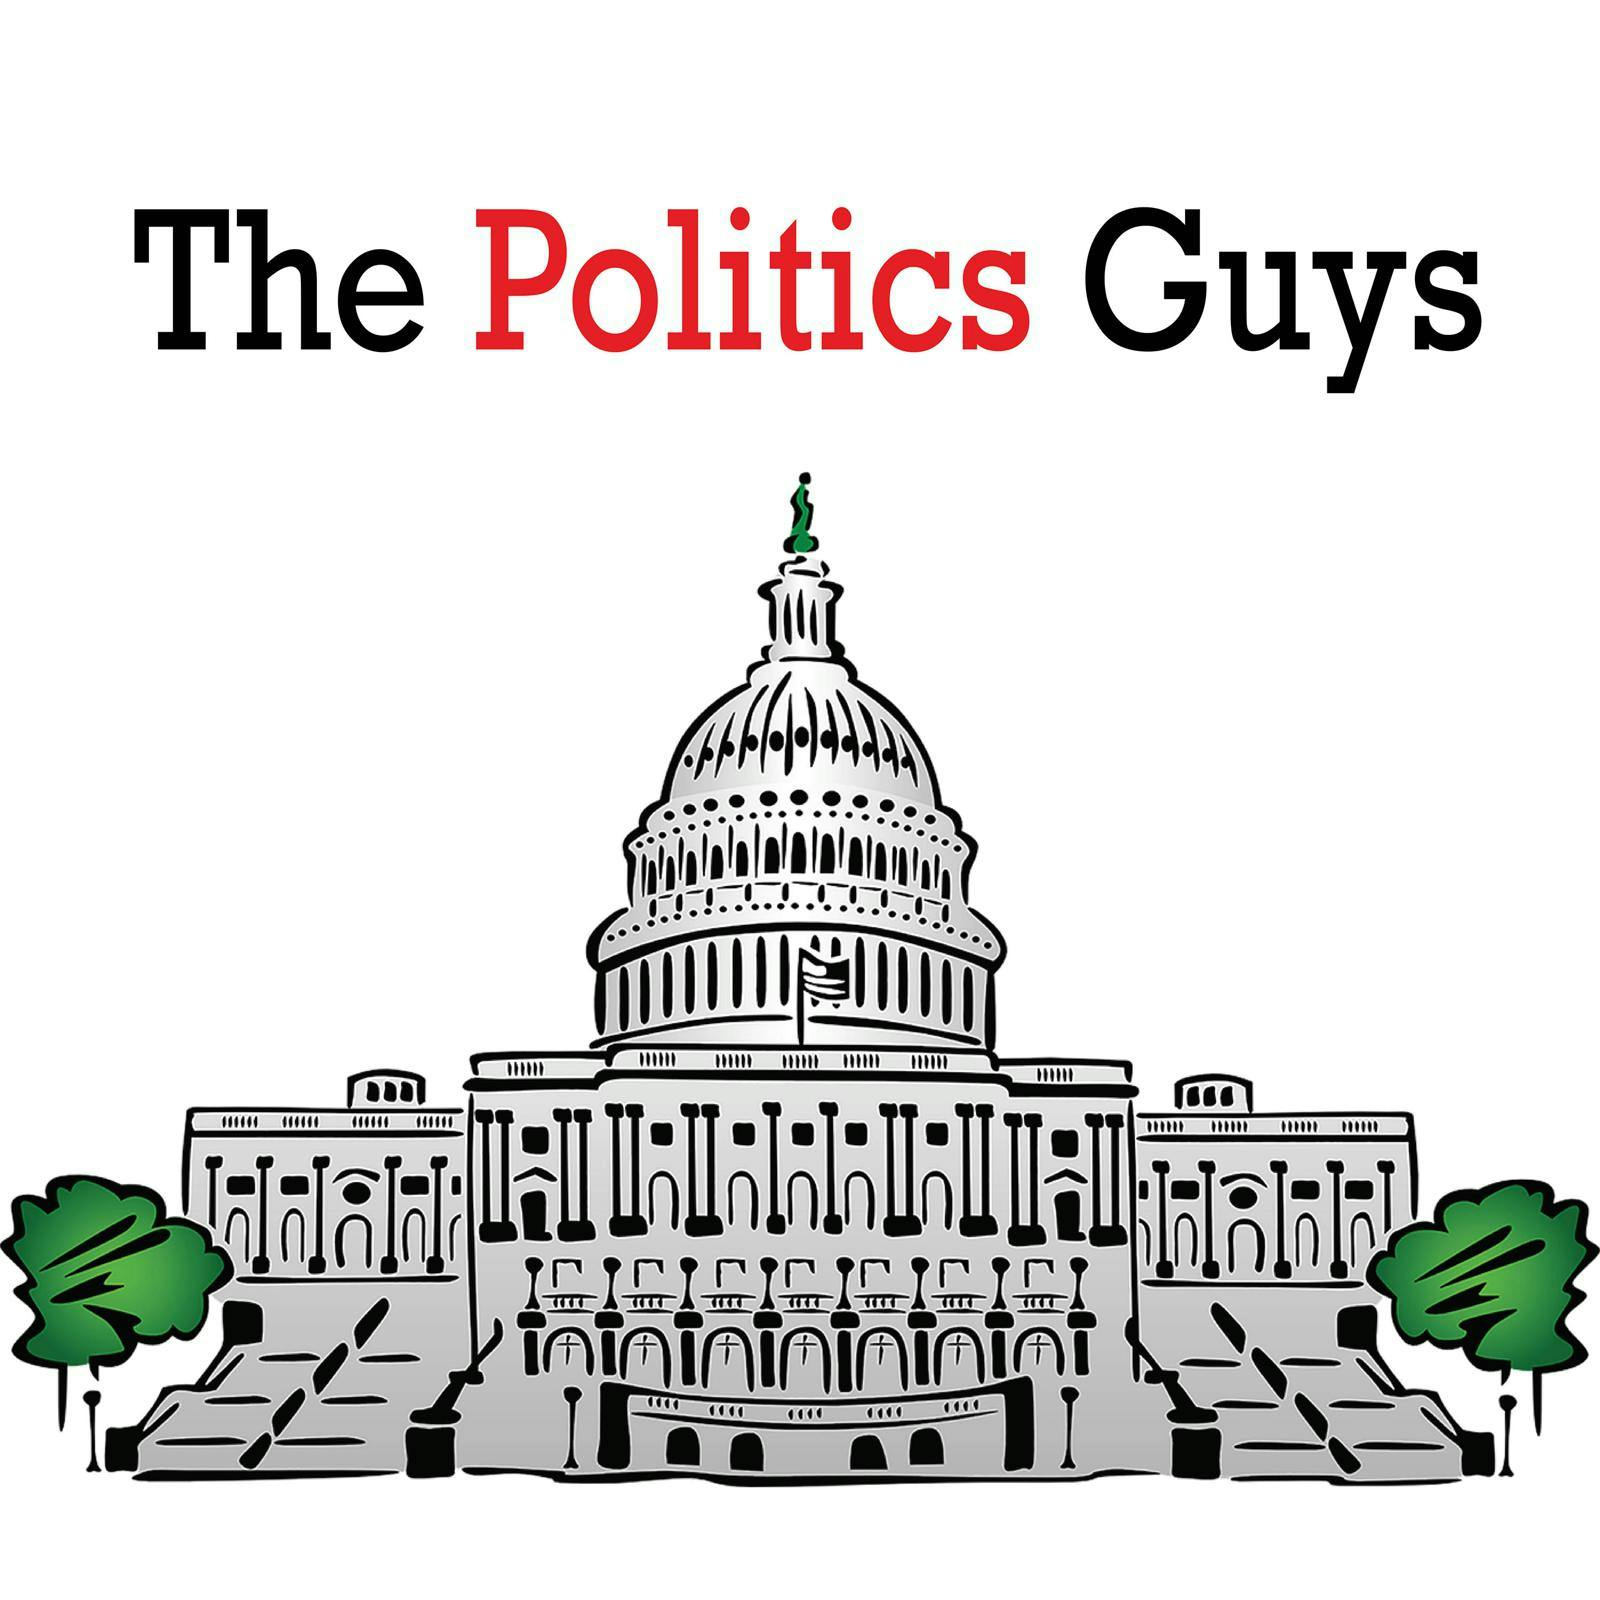 Ask The Politics Guys: The Green Party